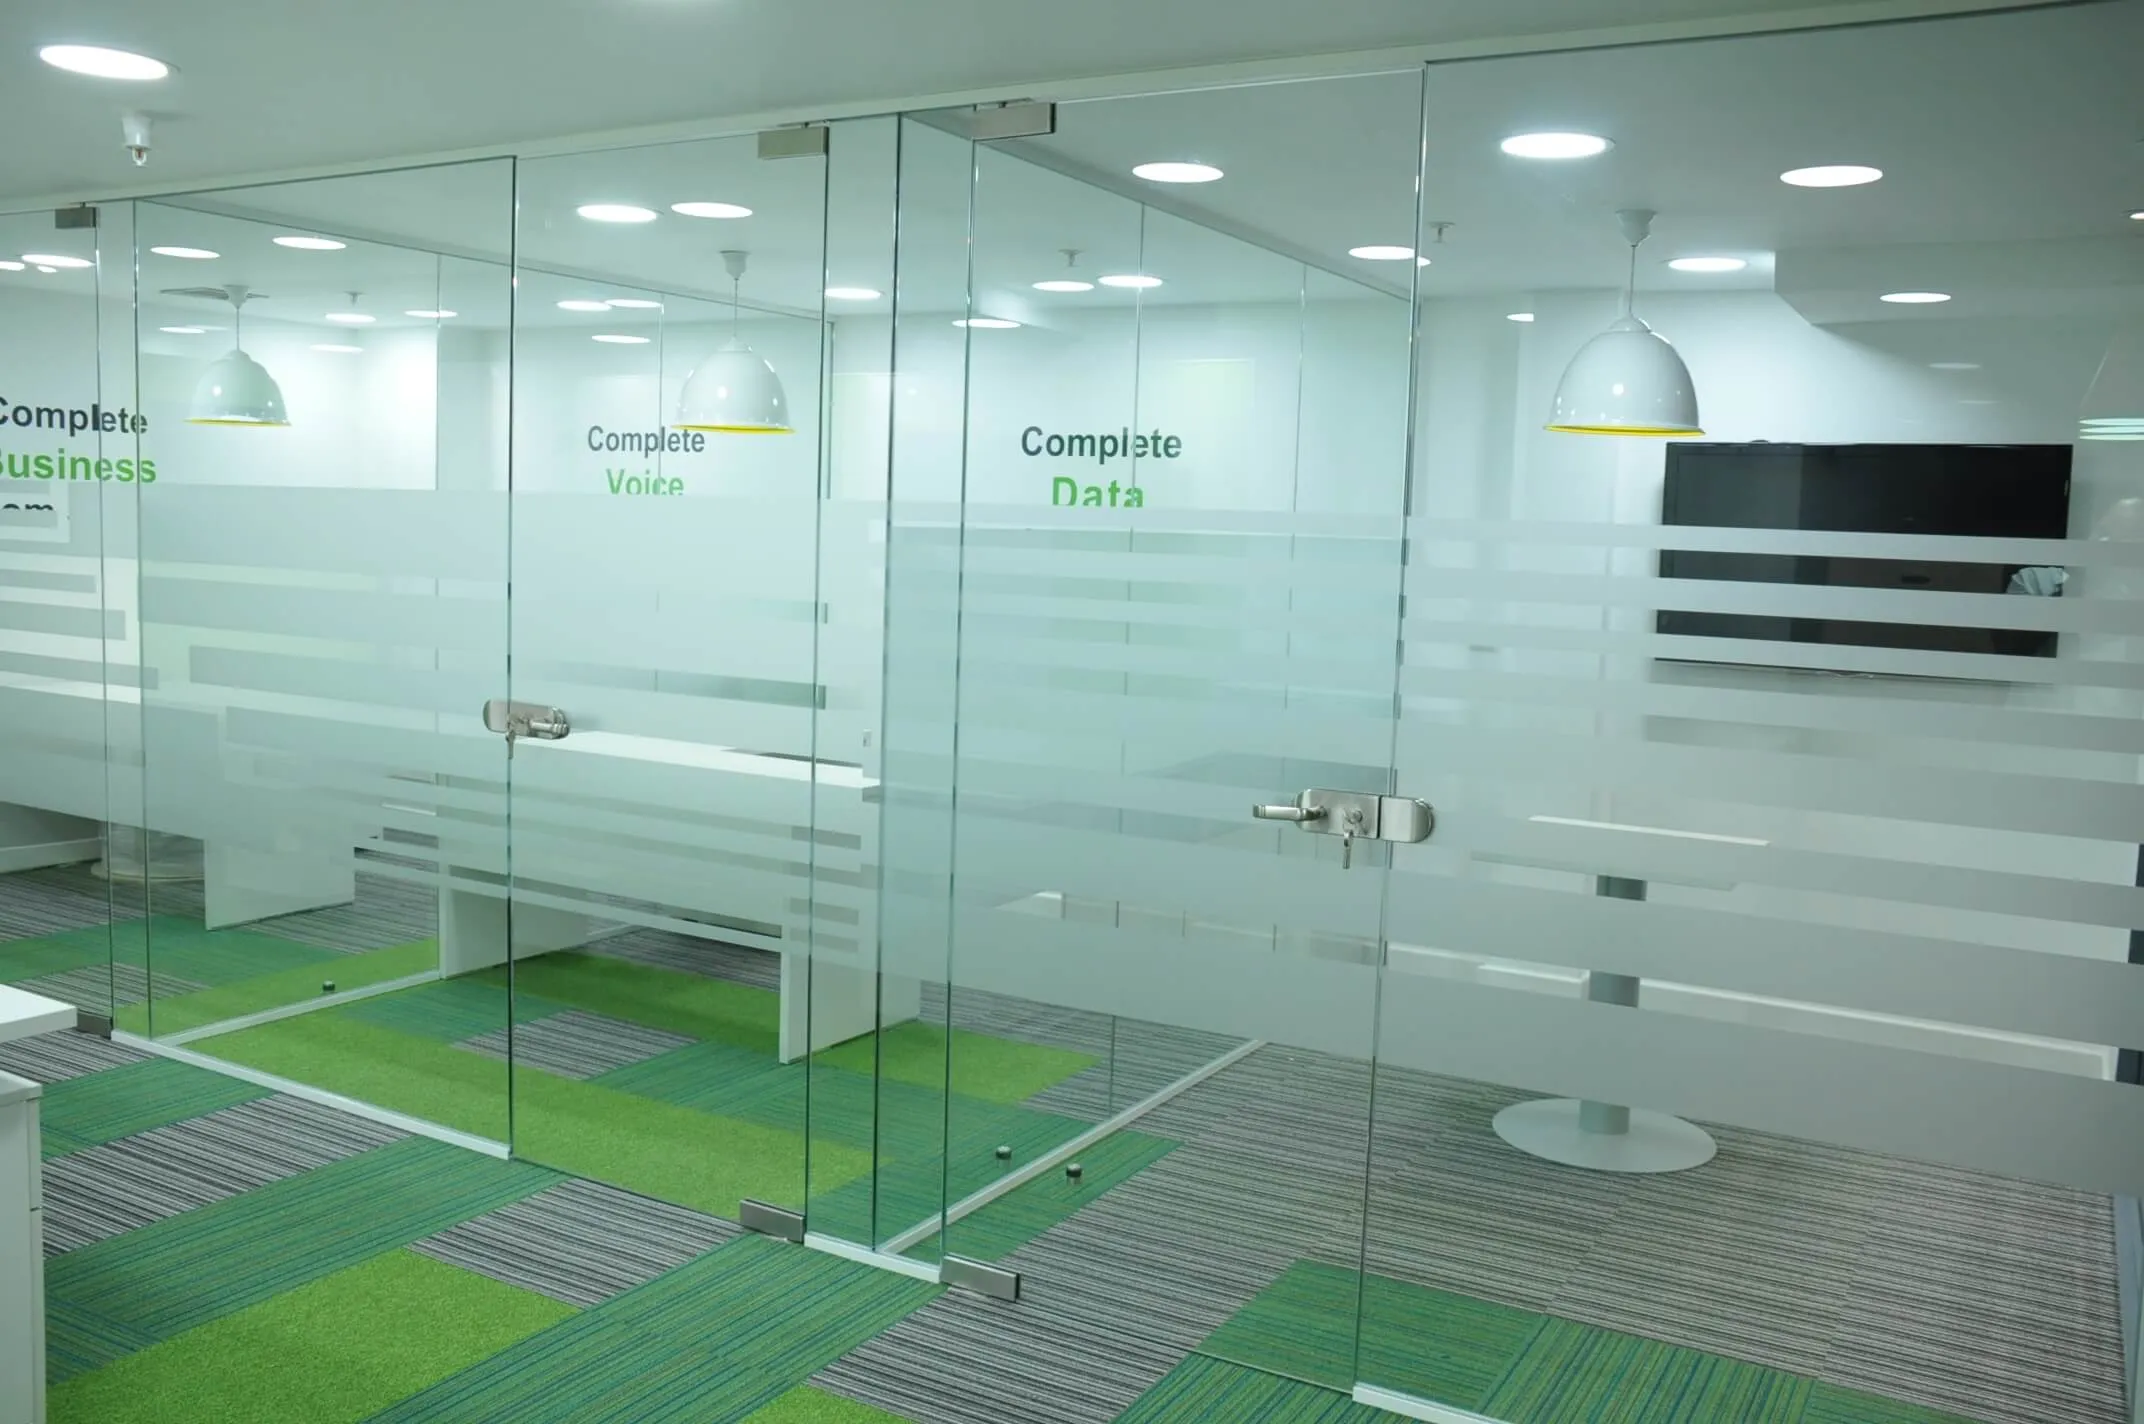 Private work spaces with glass partitons and frameless glass doors